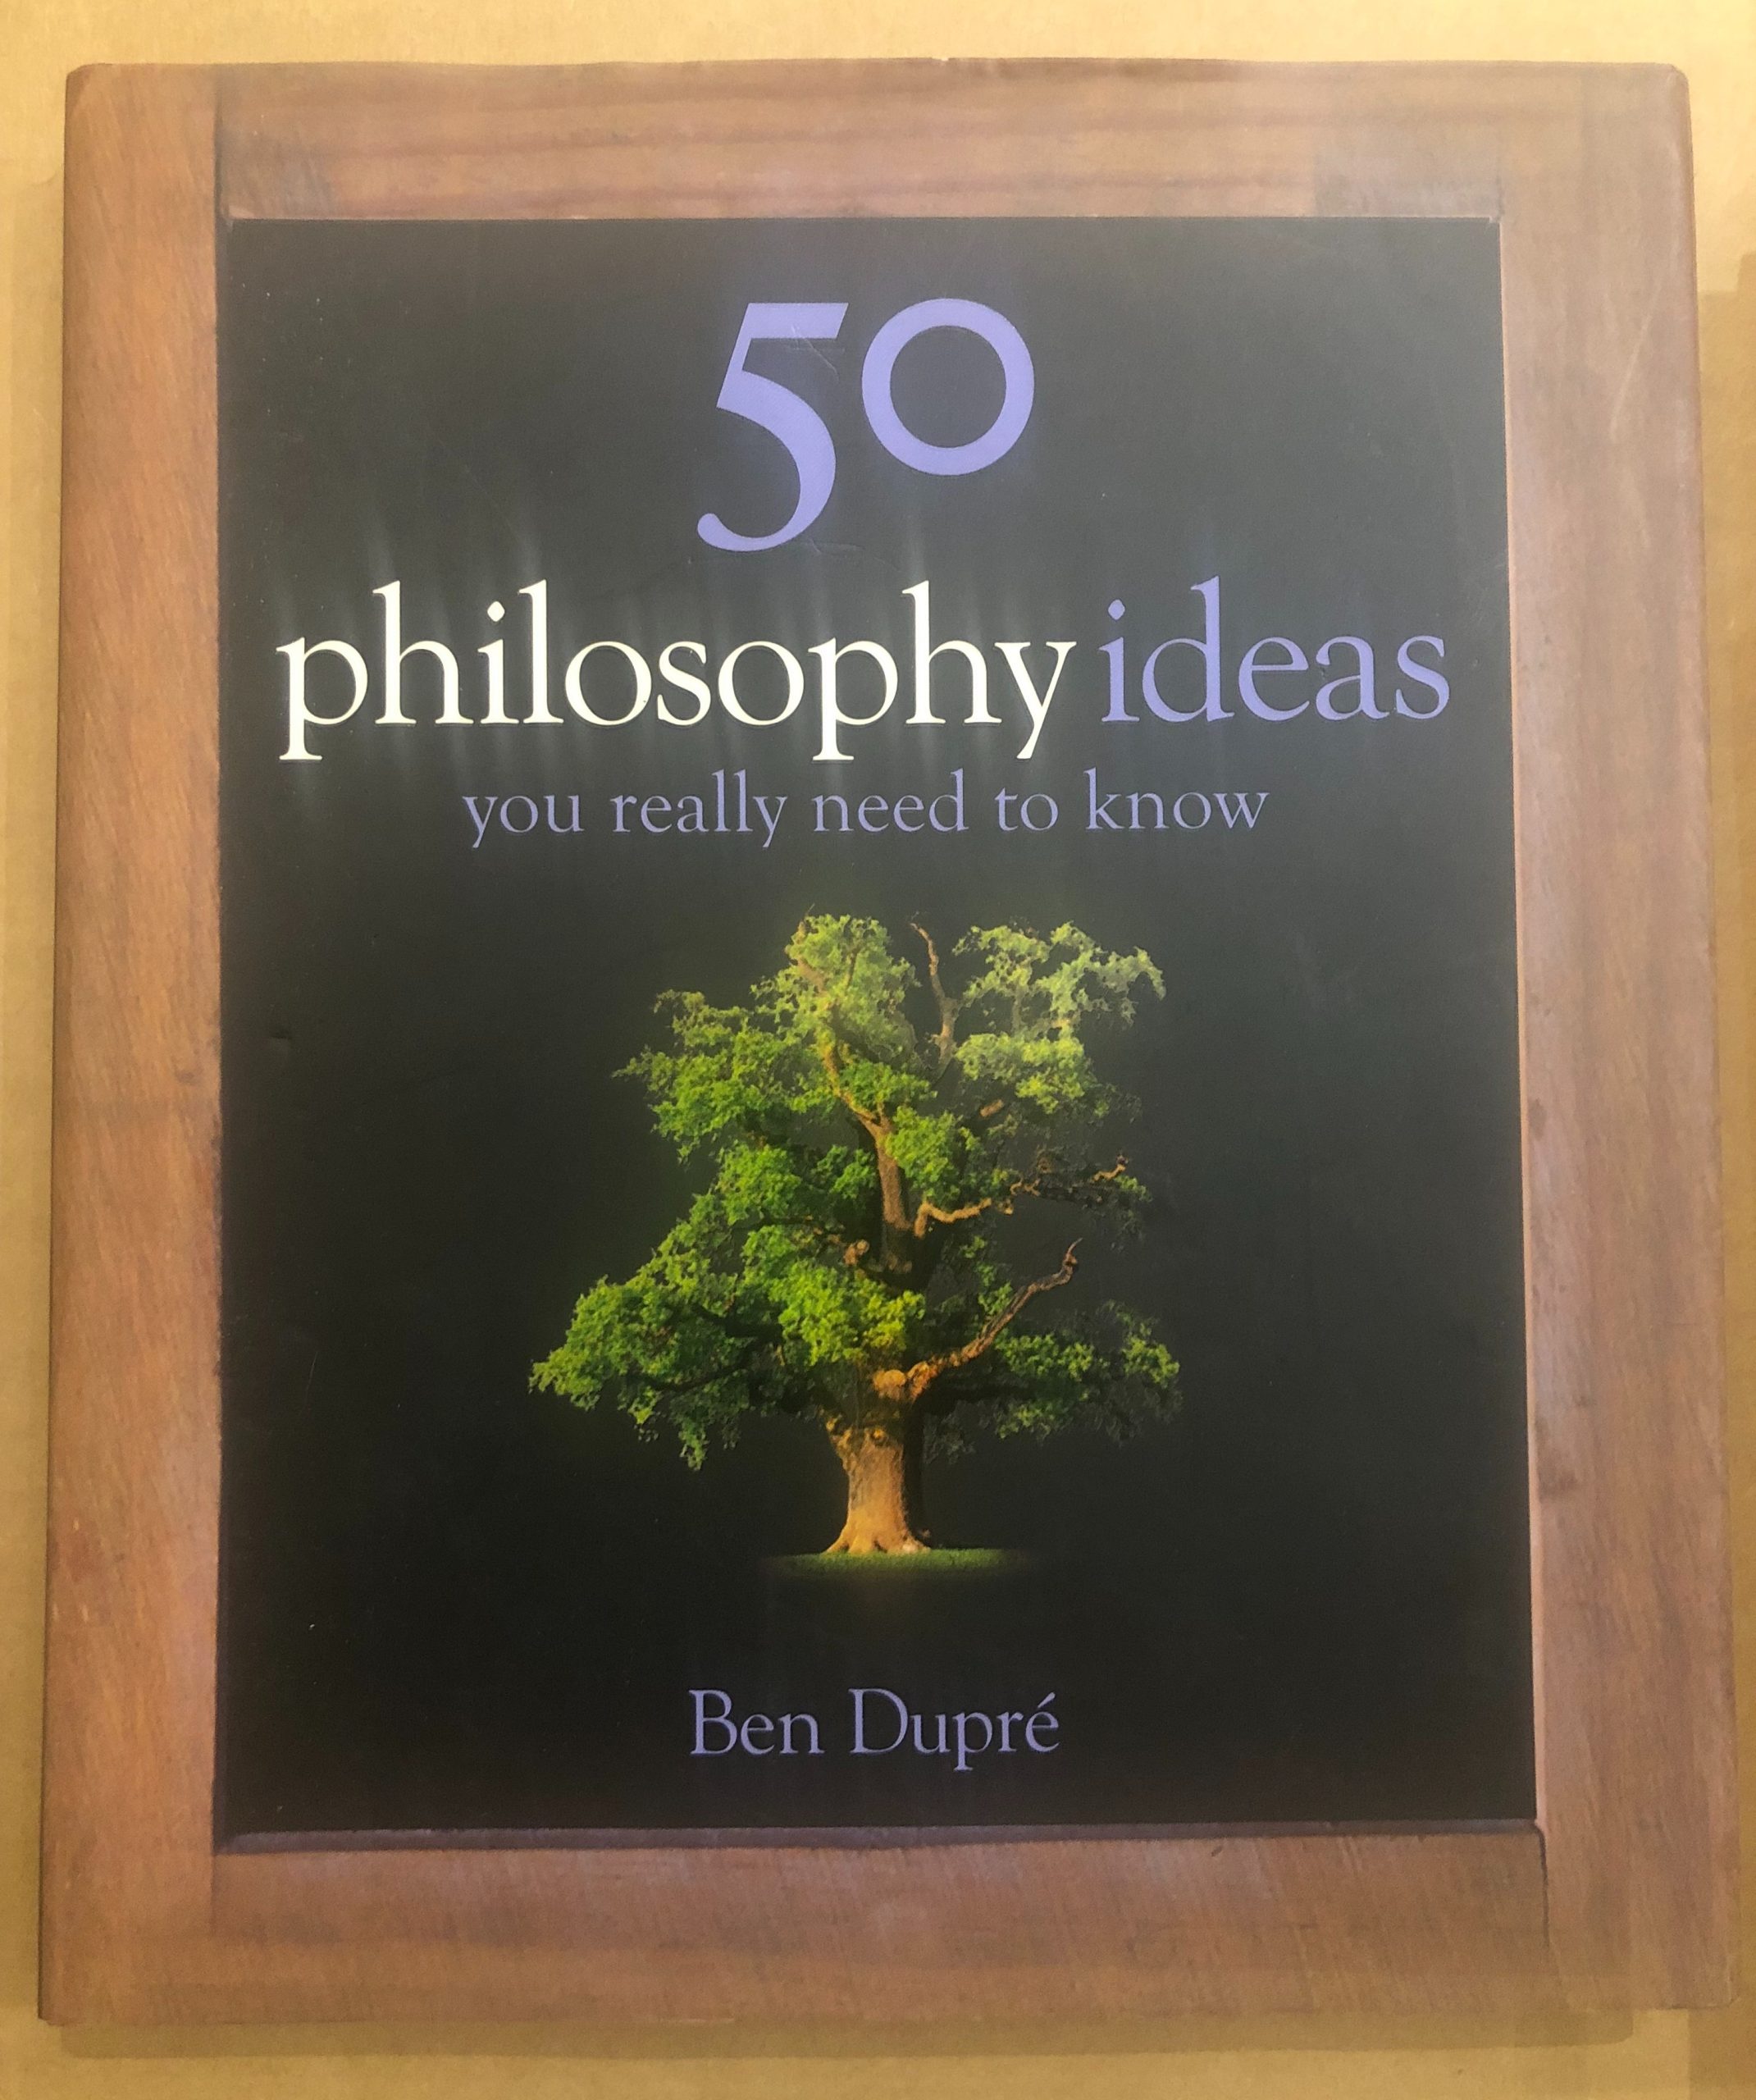 50 Philosophy Ideas You Really Need to Know - hardcover book